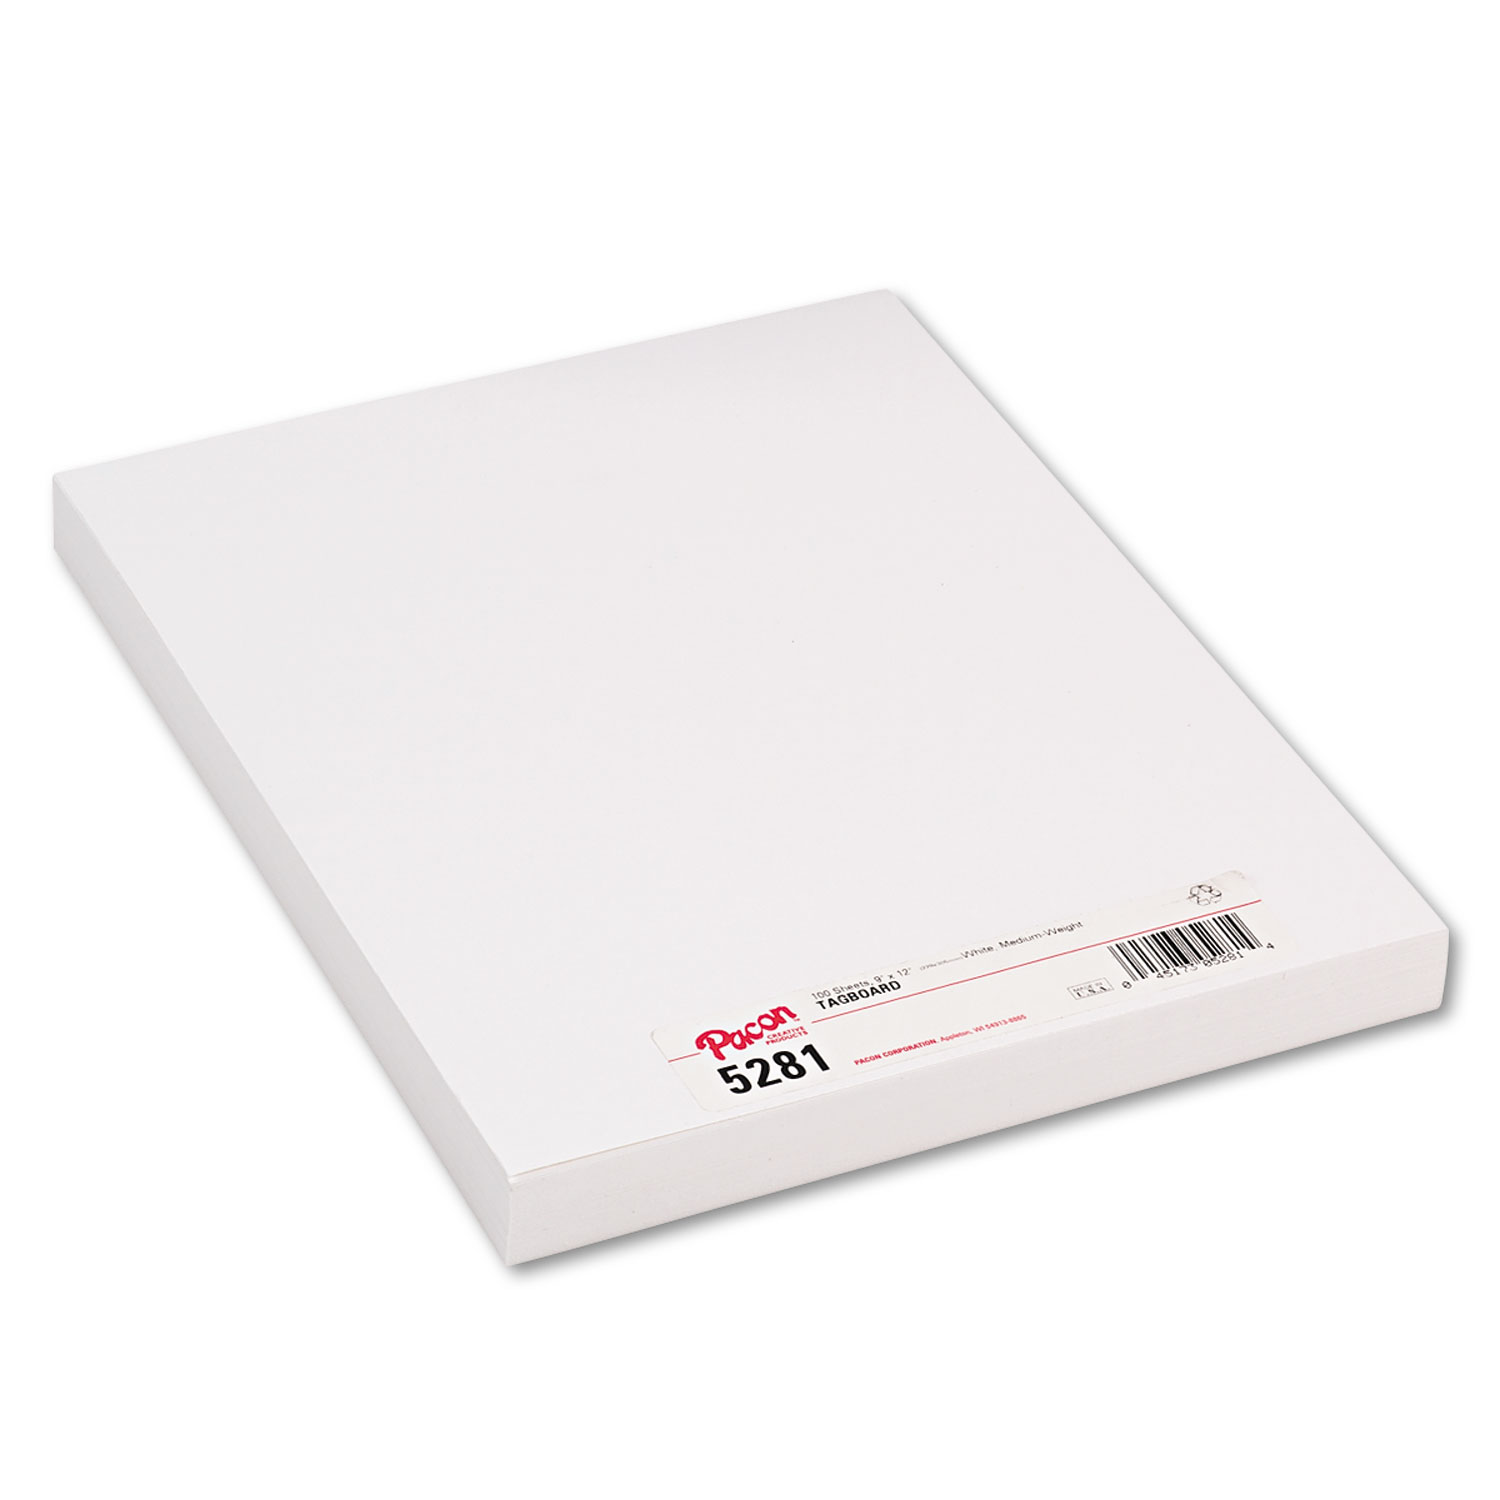 Medium Weight Tagboard, 12 x 9, White, 100/Pack